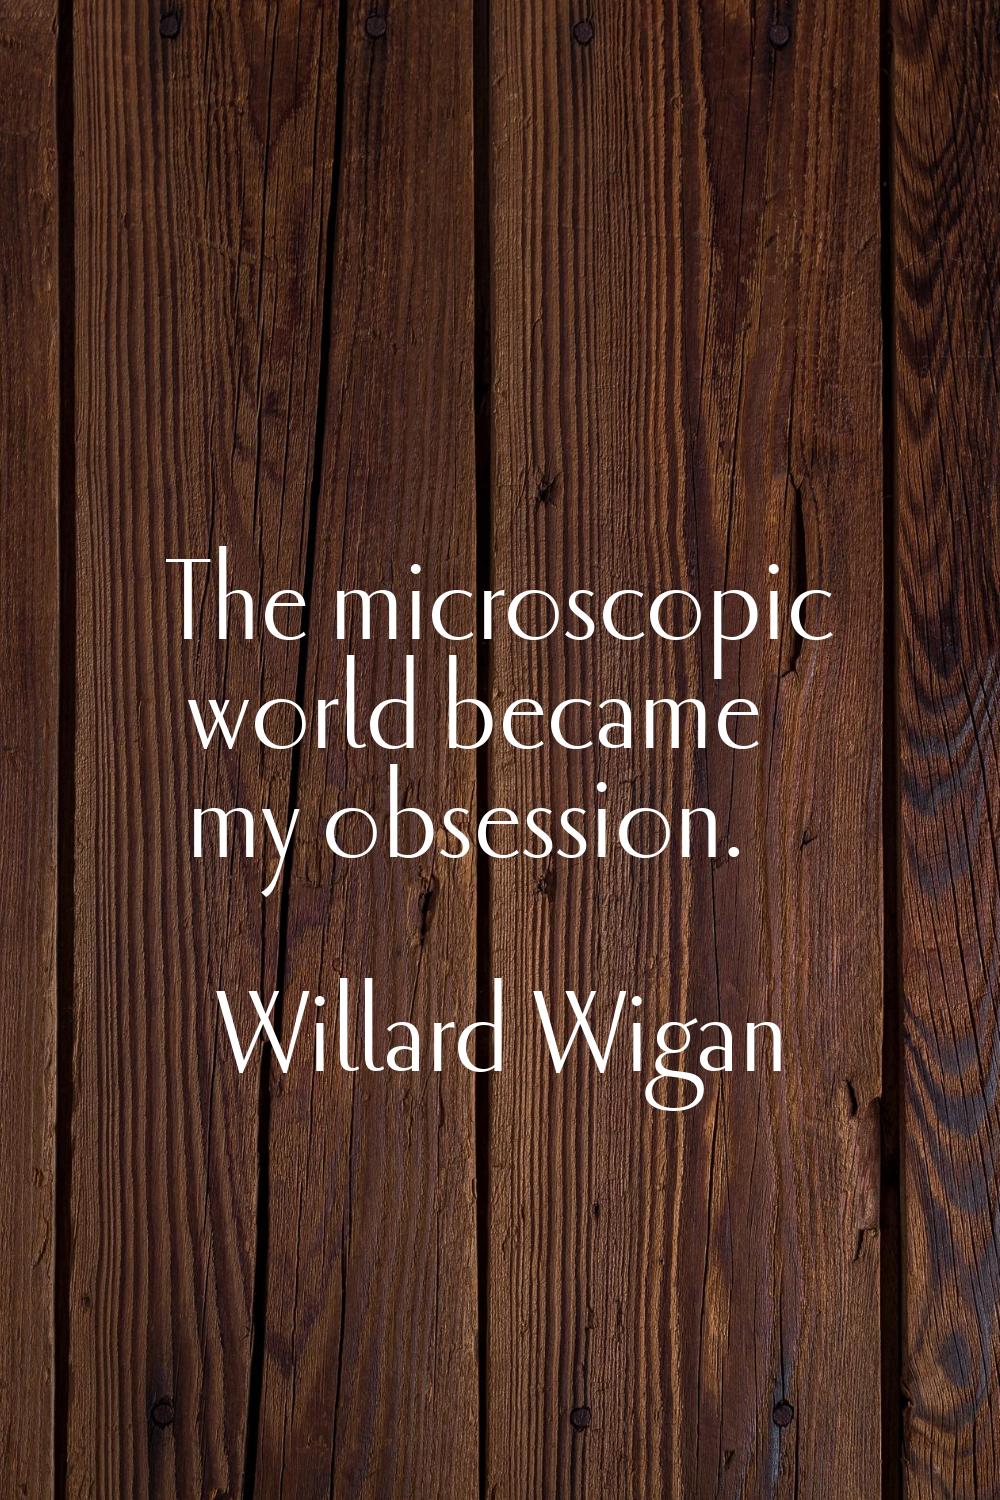 The microscopic world became my obsession.